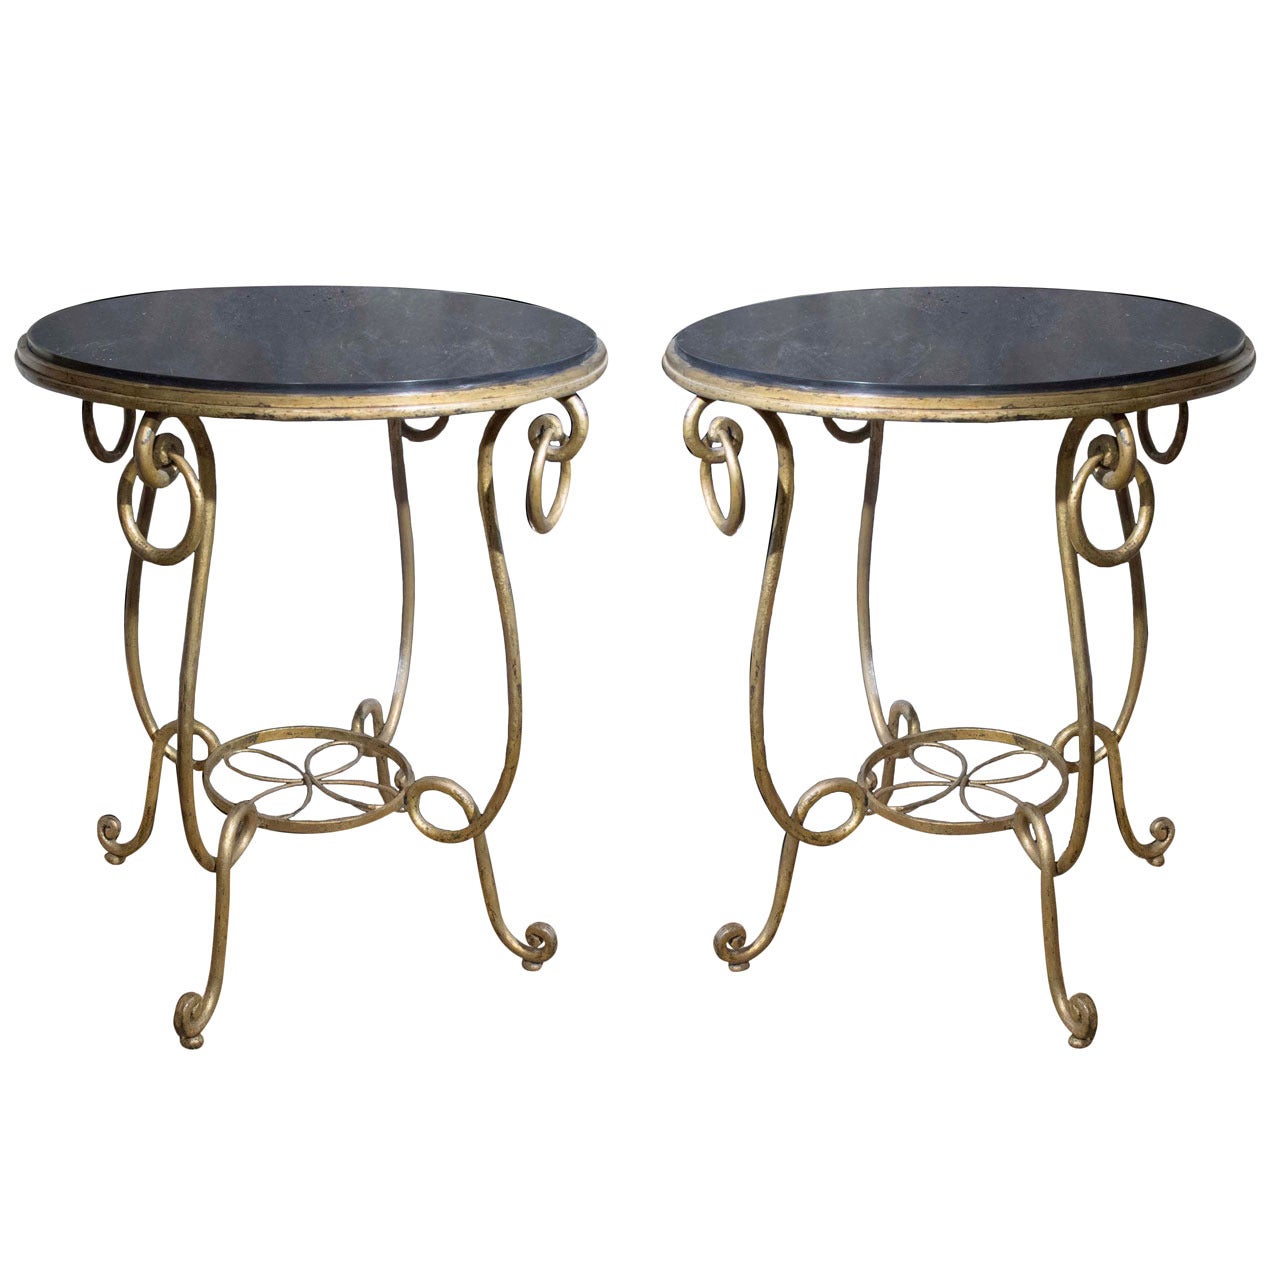 Pair of Gilt Iron Occasional Tables in the Manner of René Prou, circa 1940 For Sale